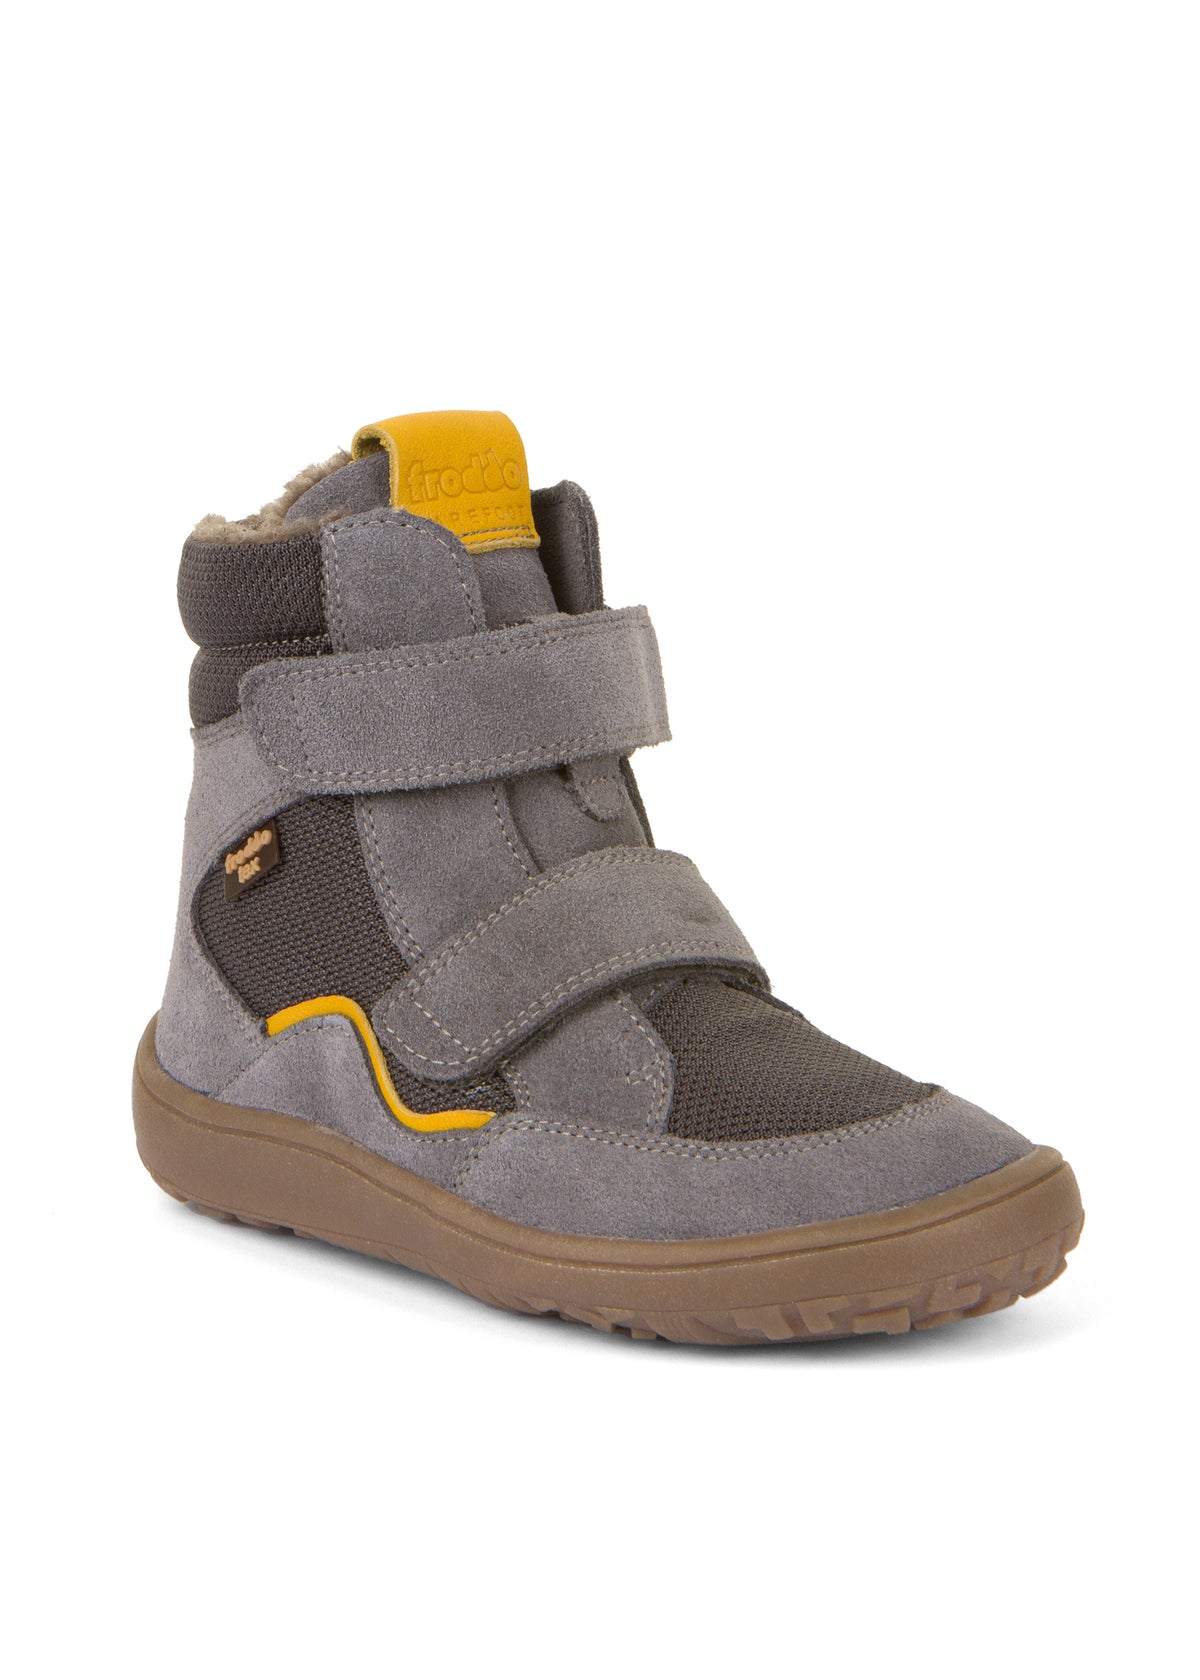 Children's barefoot shoes - winter shoes with TEX membrane - gray